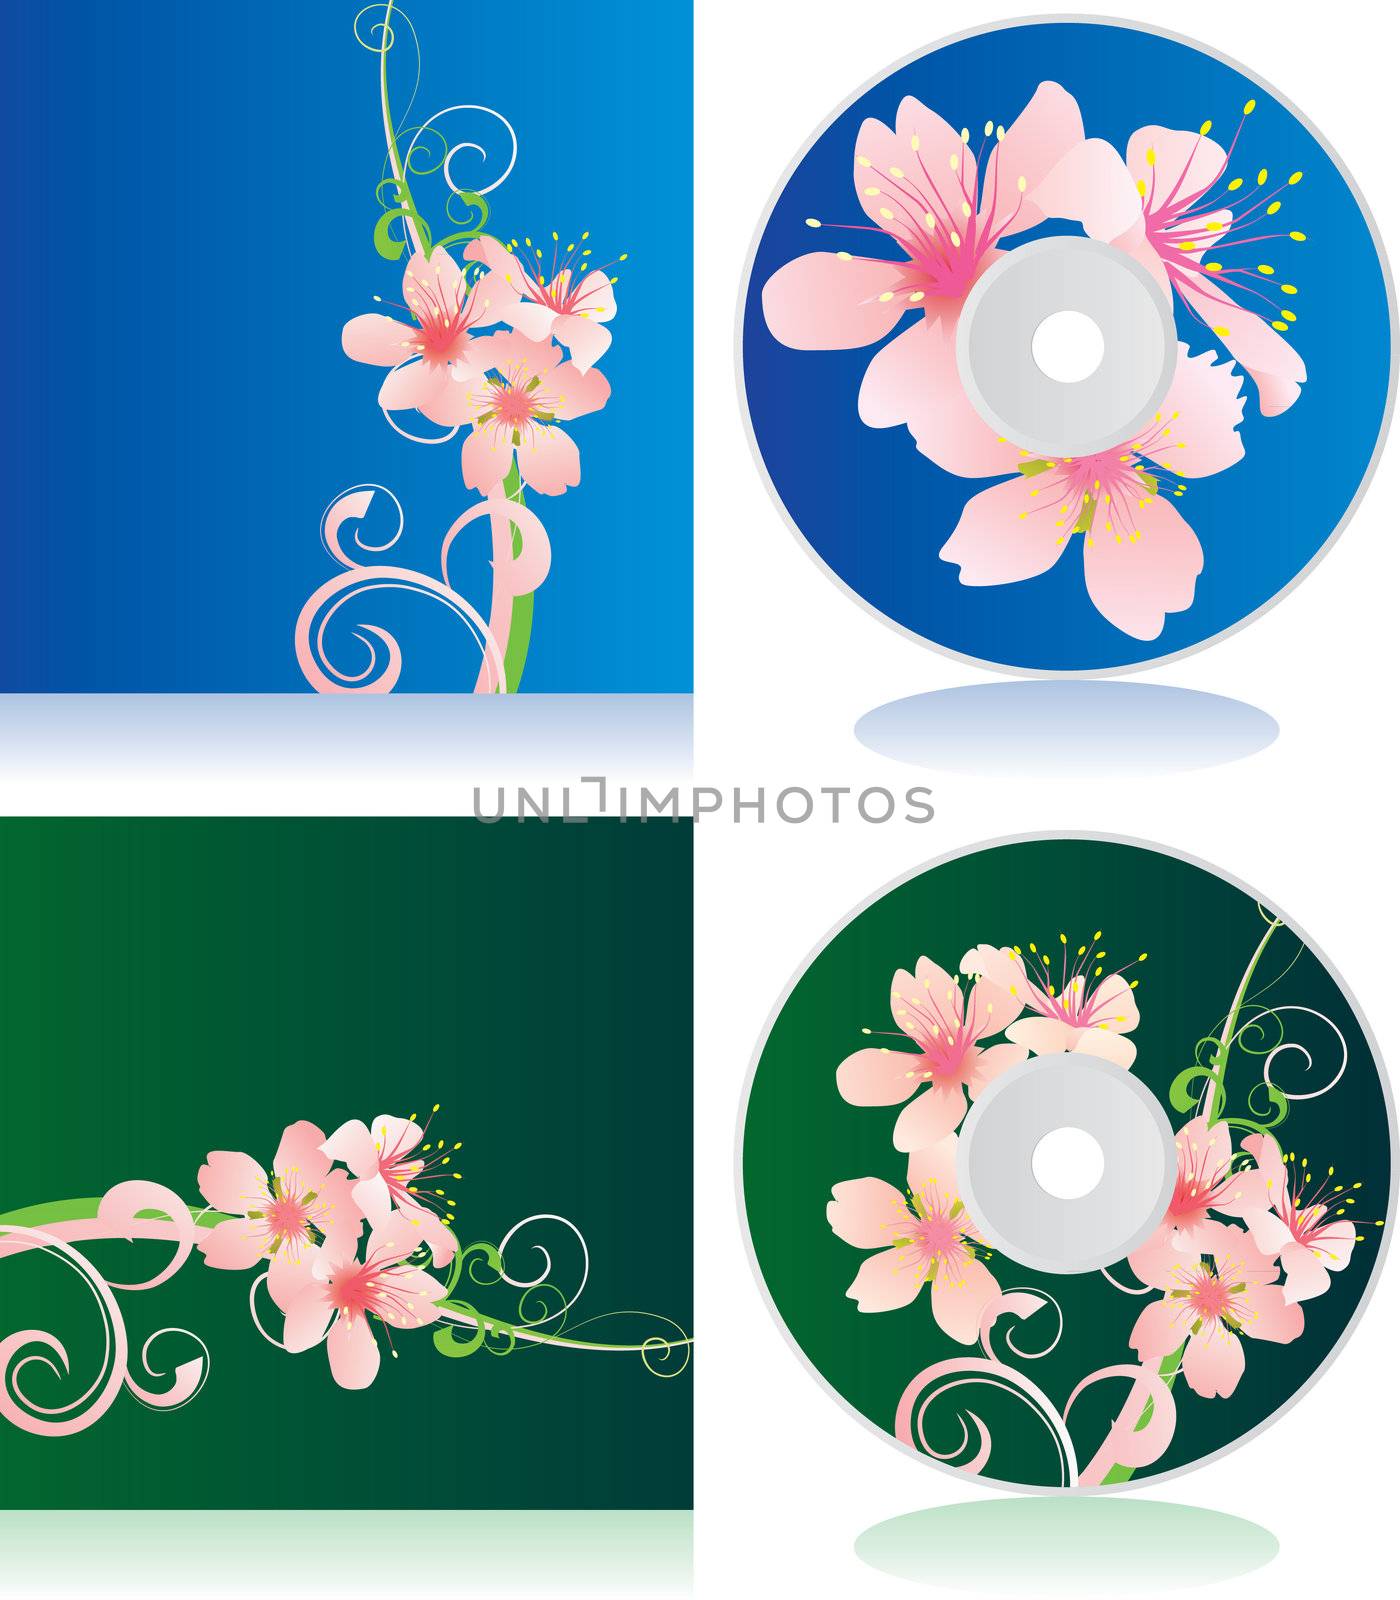 vector set of disc covers with flowers